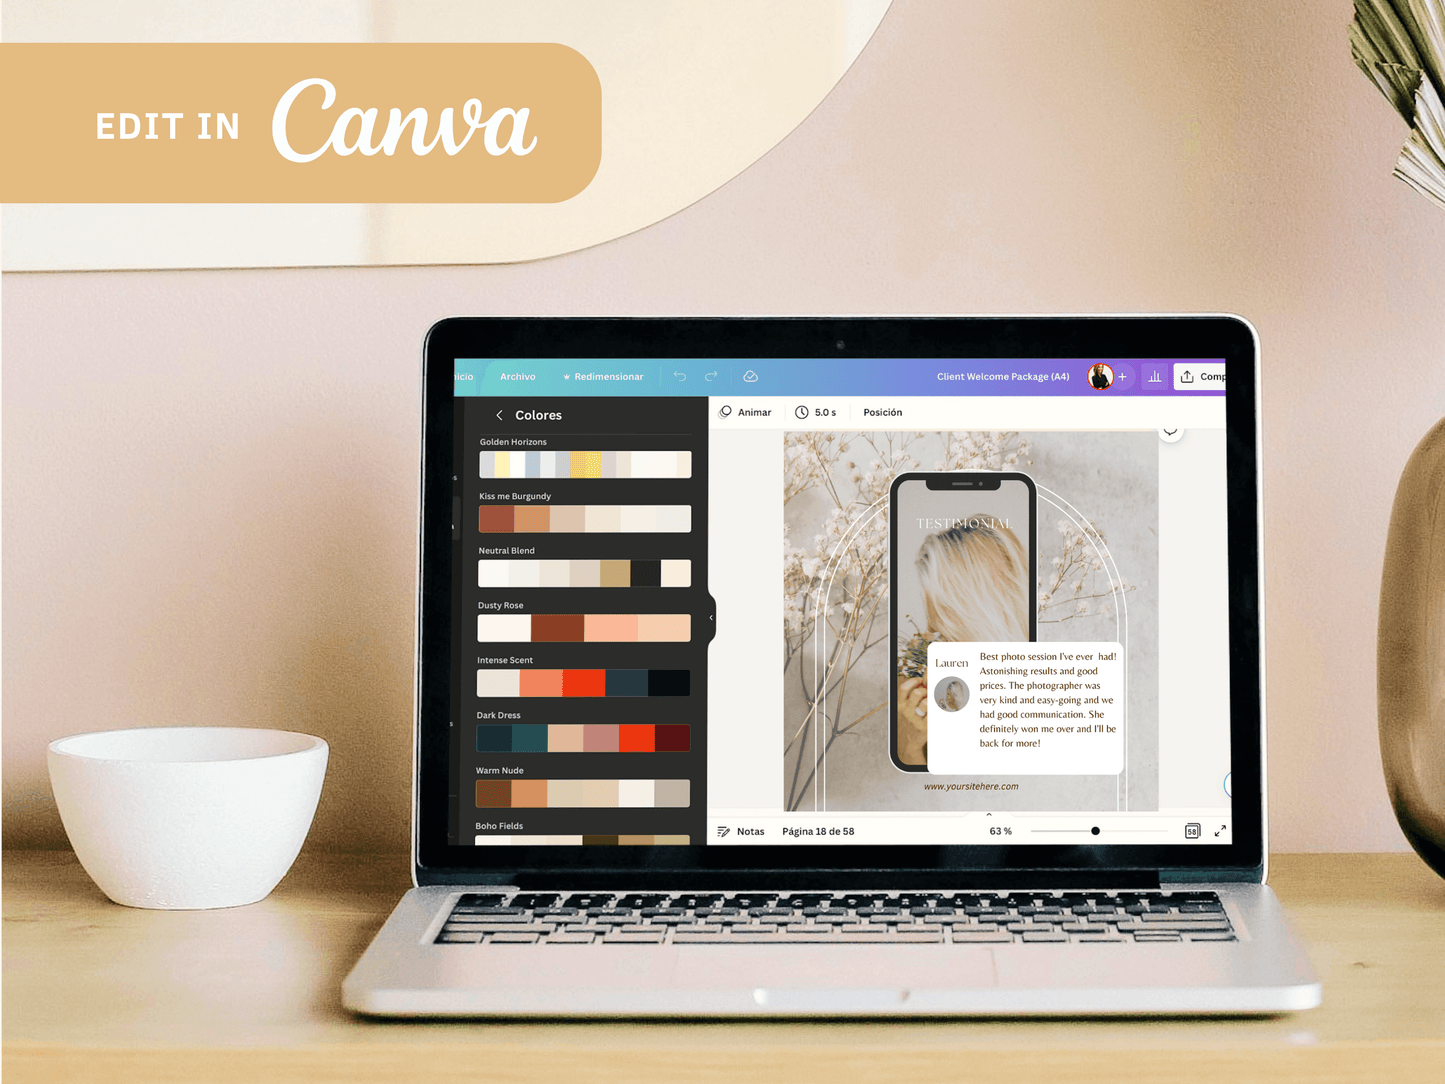 Edit in Canva! You can see a laptop mockup using the Canva software to edit a PLR template with aesthtetic font and boho elements for your business.